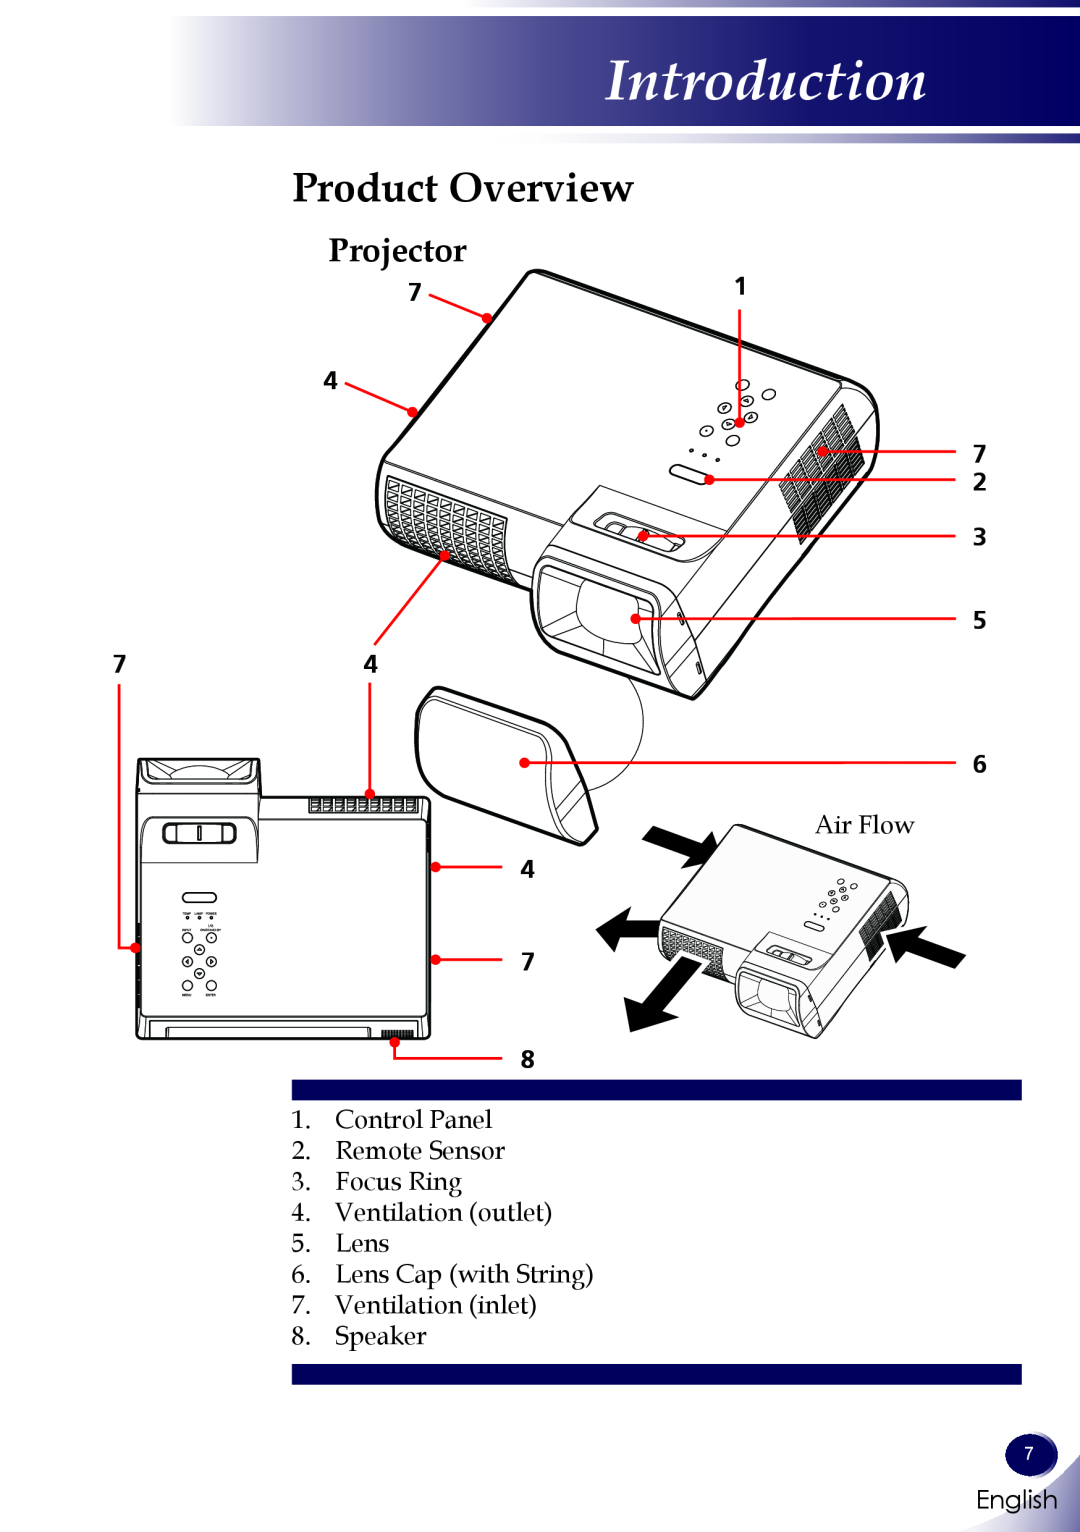 Sanyo PDG-DWL100 owner manual Product Overview, Projector, Introduction, English 